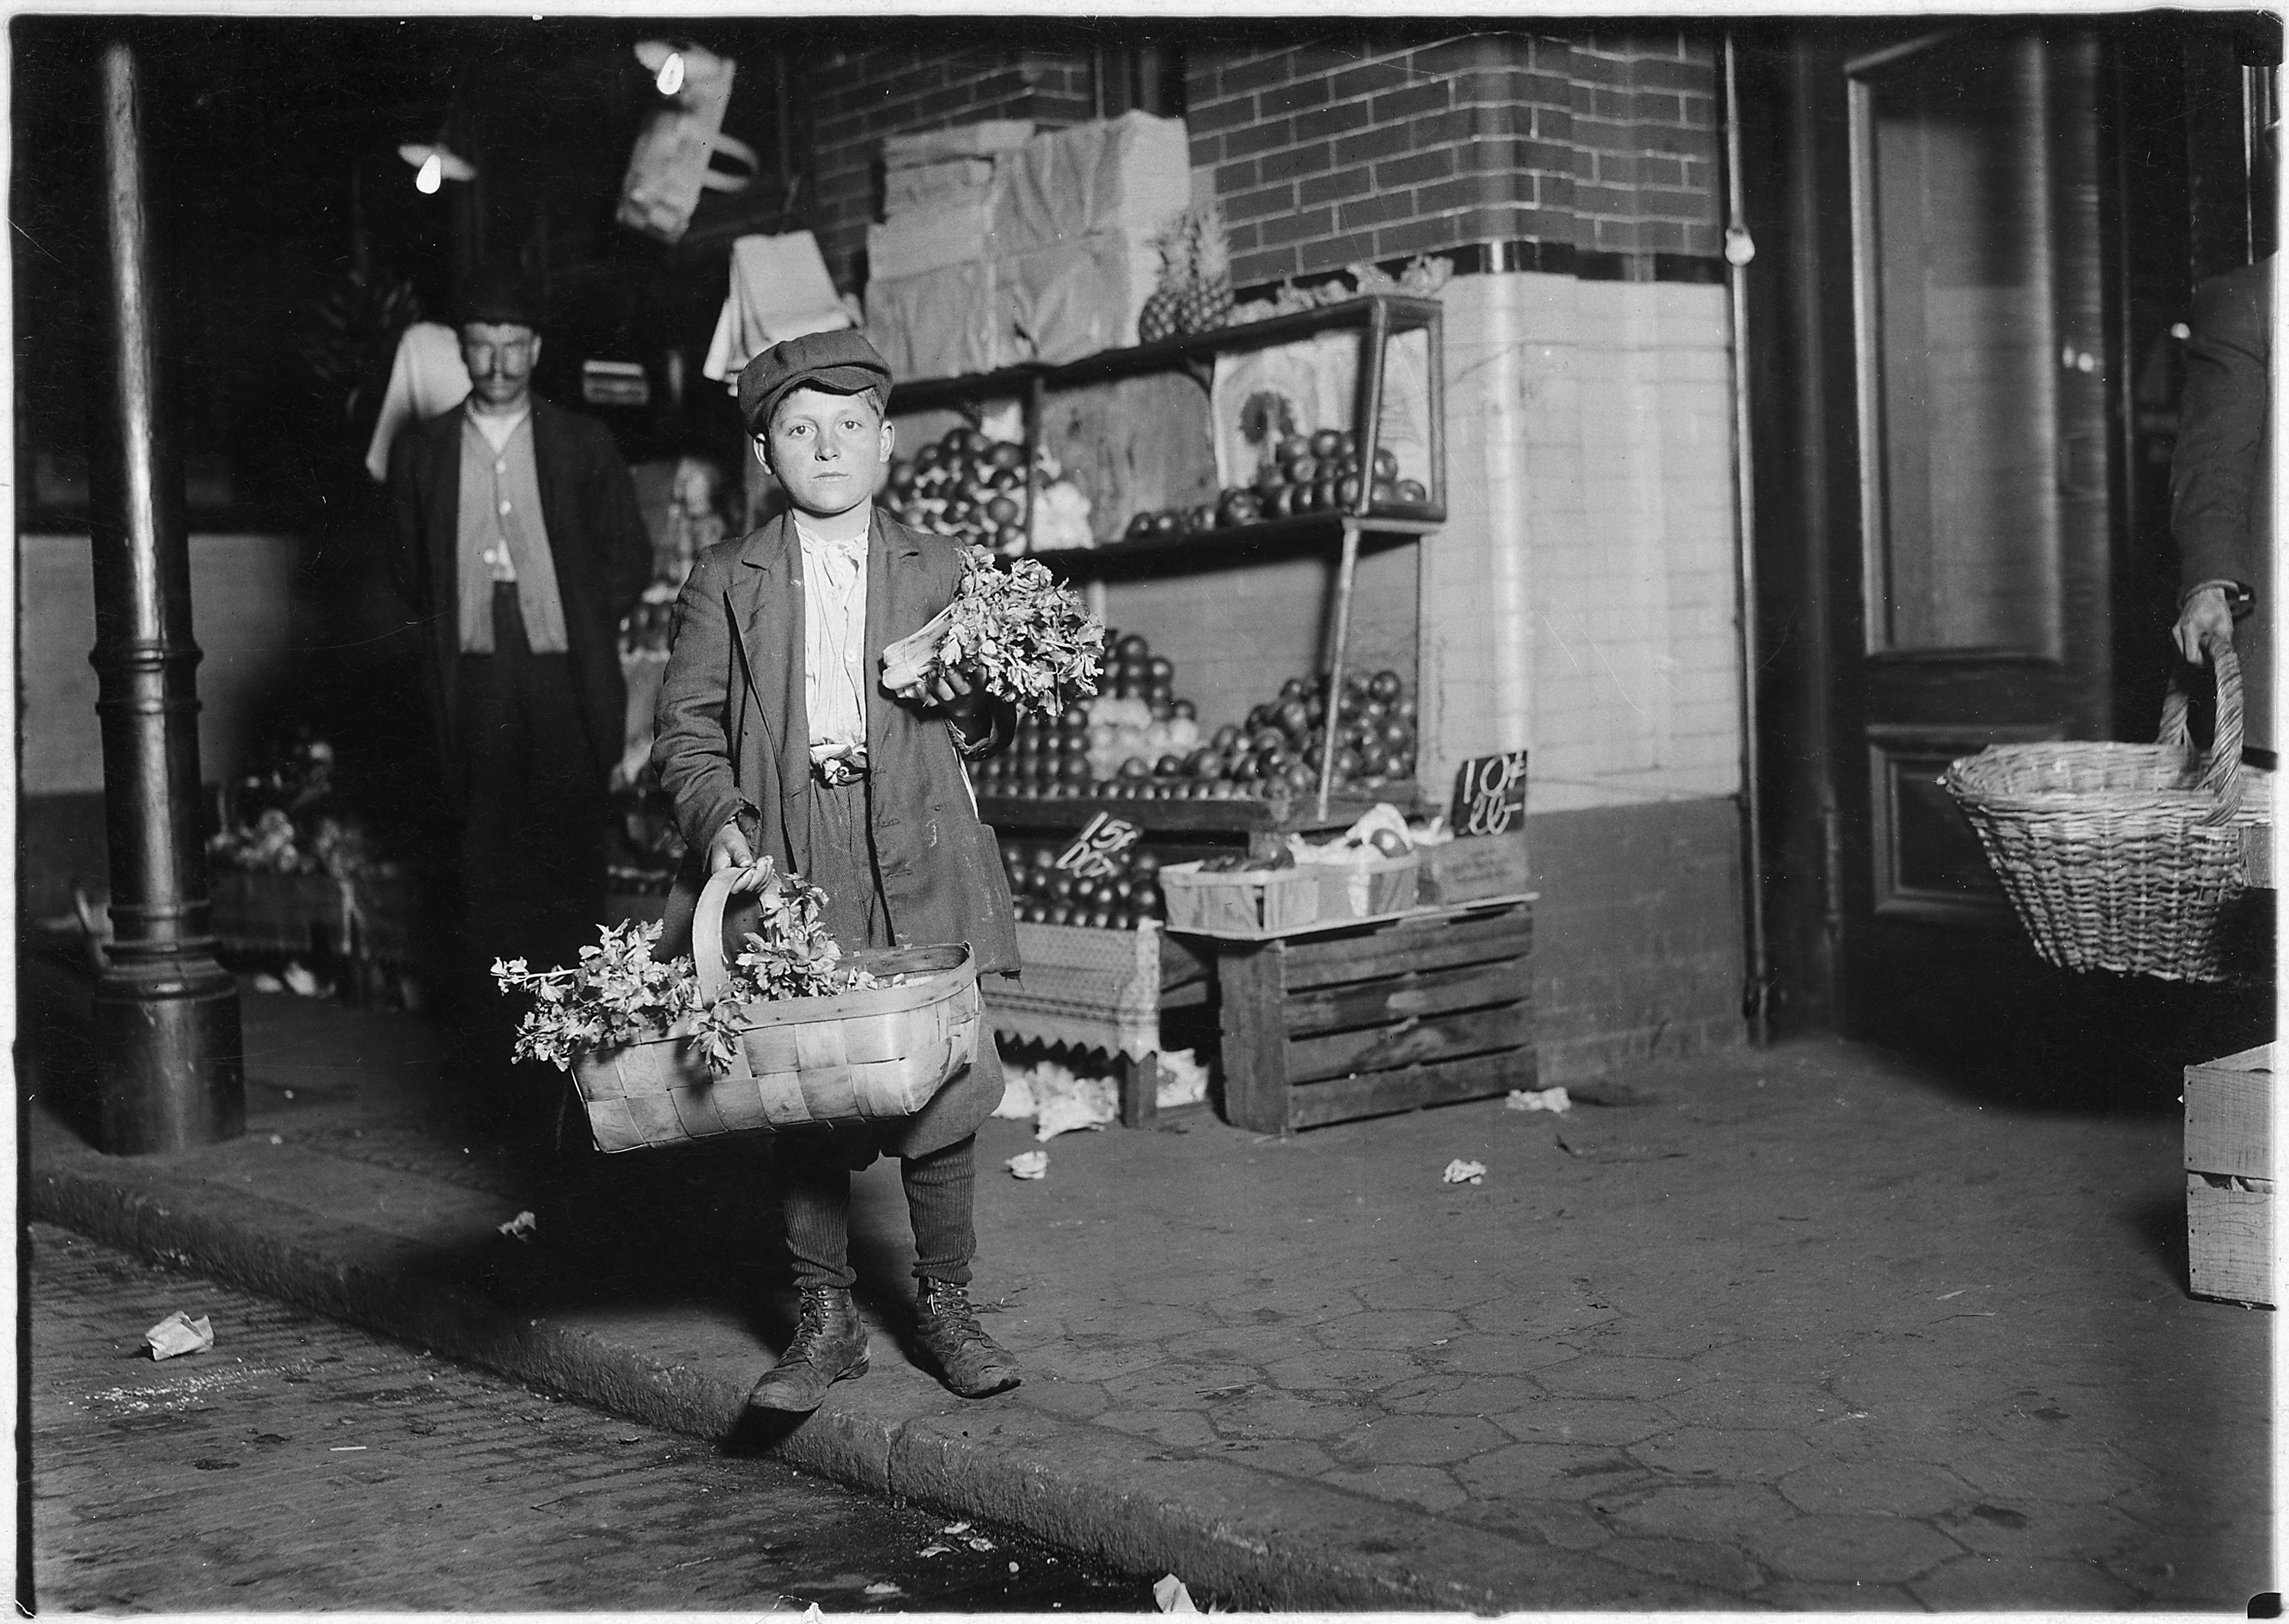 At center market. 11 year old celery vender. He sold until 11 P.M. and was out again Sunday morning selling papers... - NARA - 523535